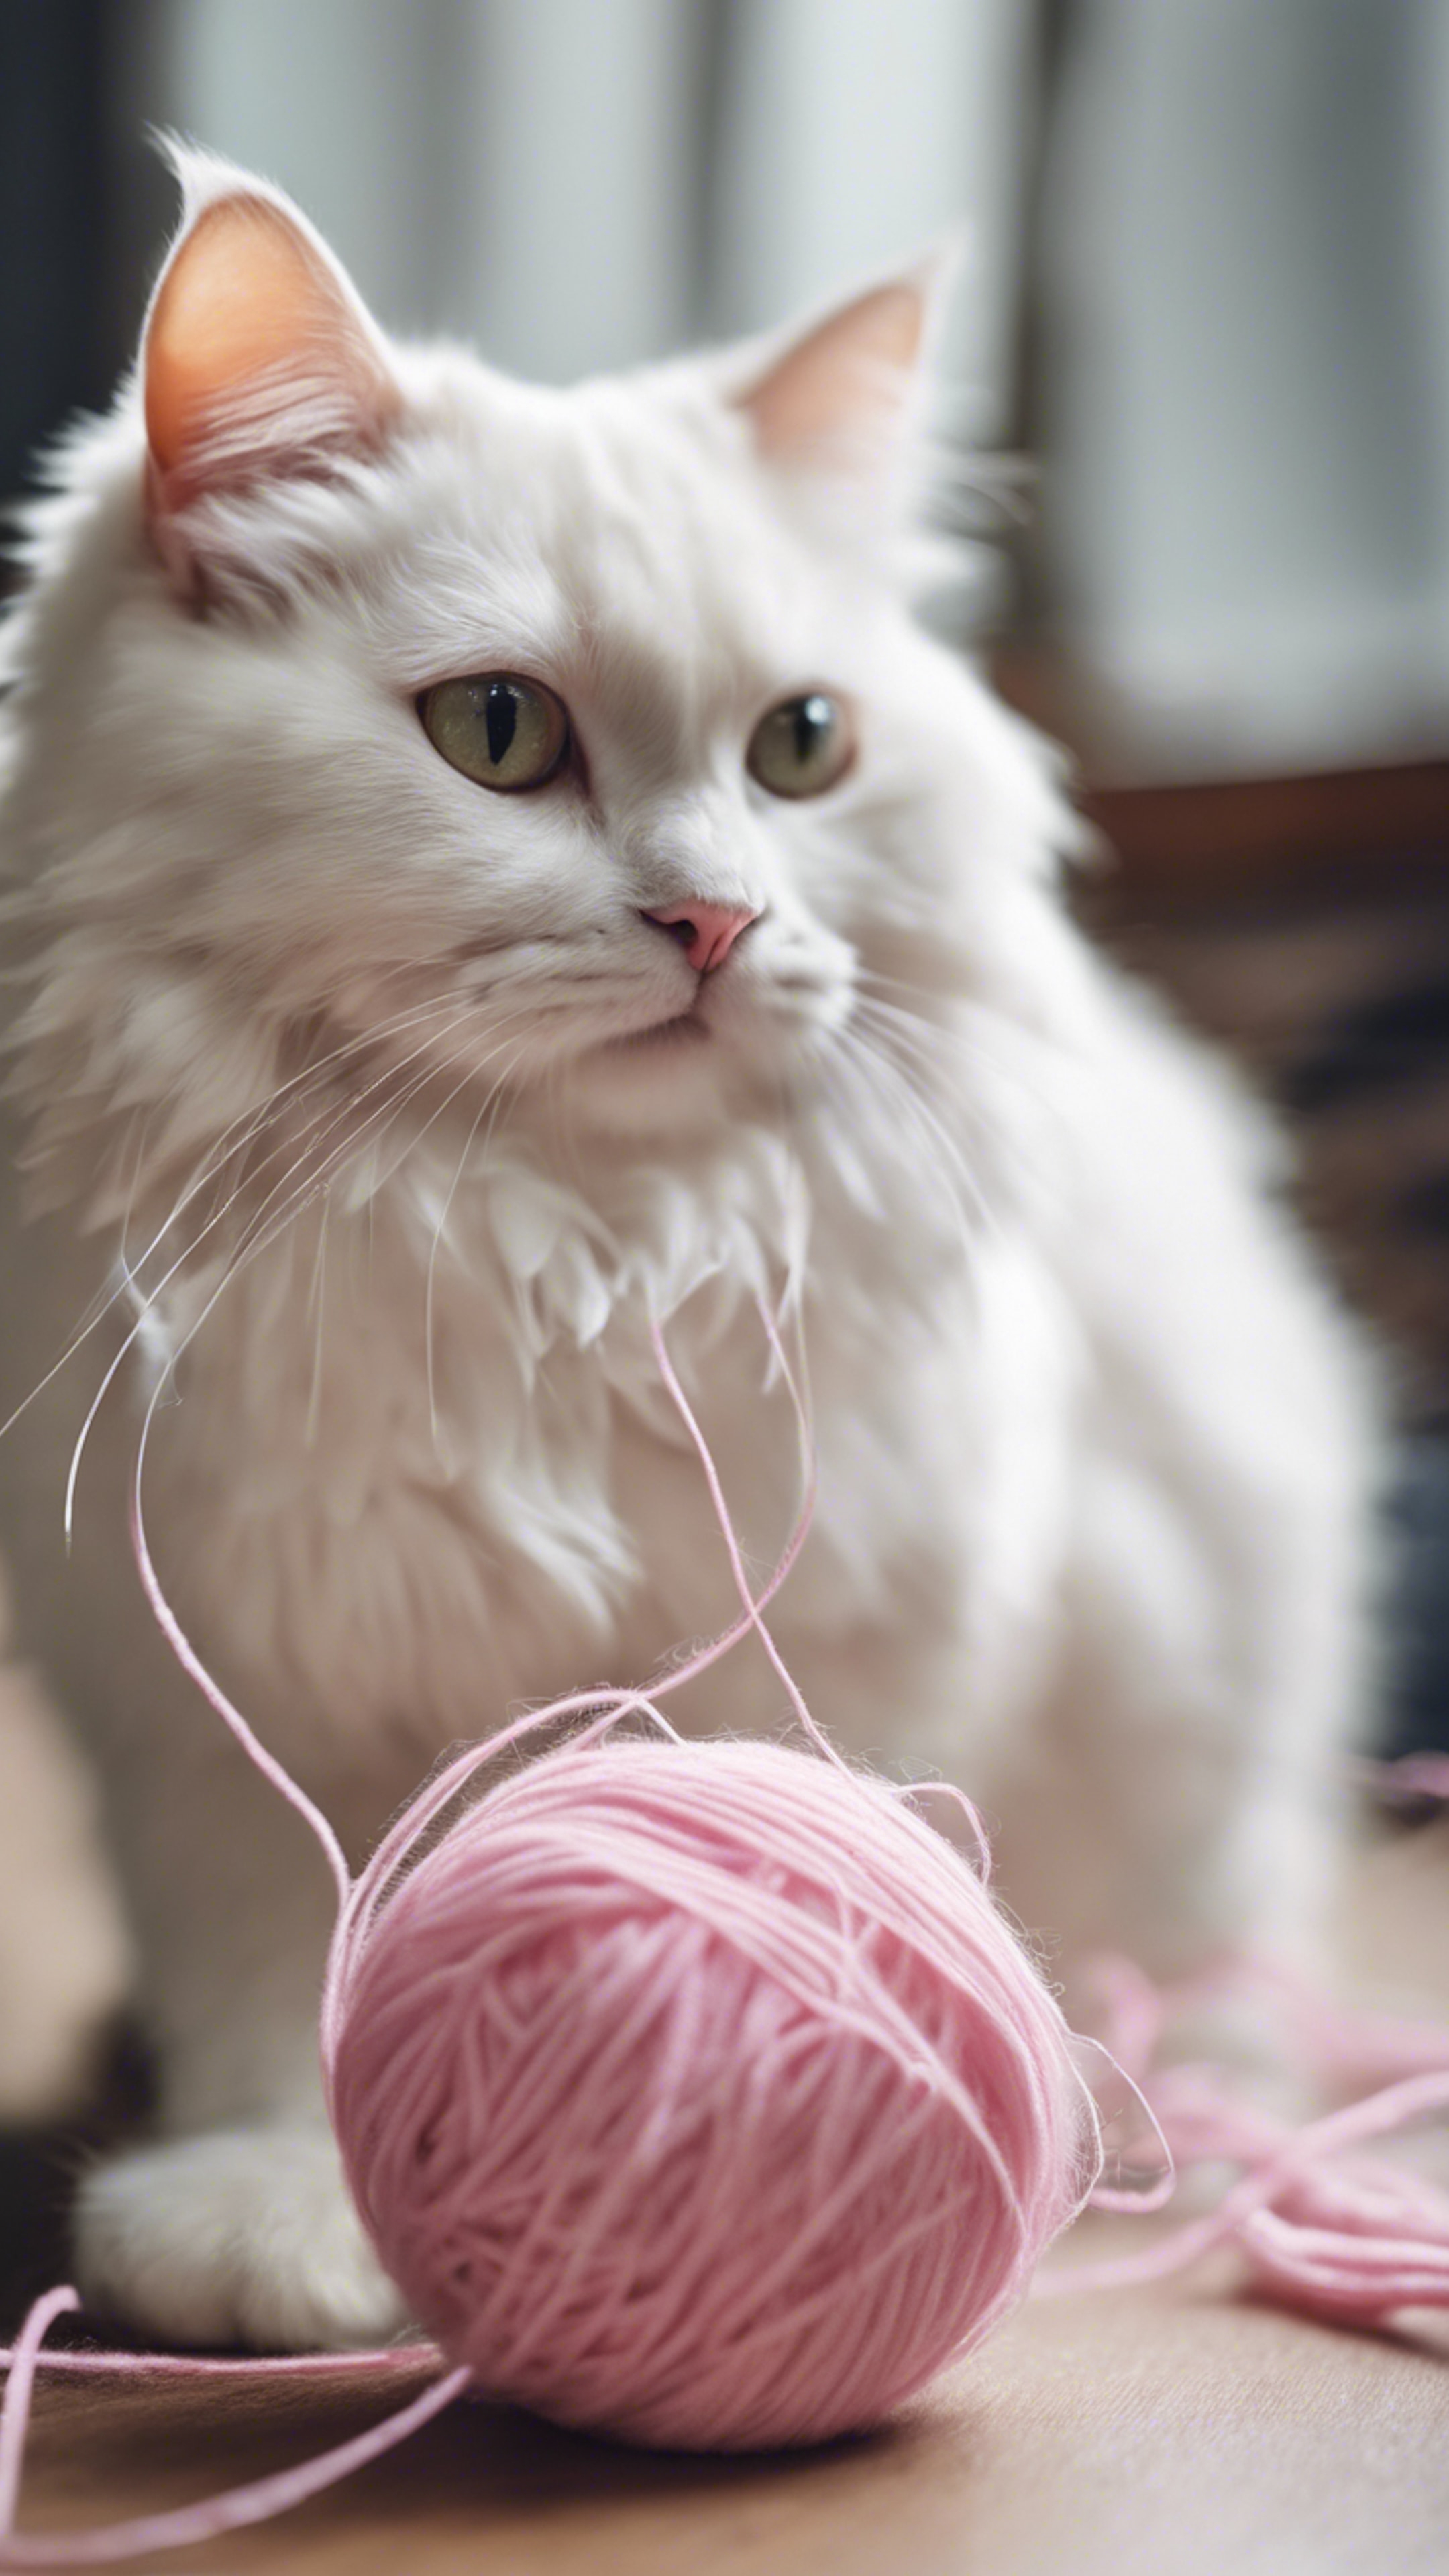 An adorable white cat, fluff all around, playing with a pink ball of yarn. Ταπετσαρία[2f9056787526421e963d]